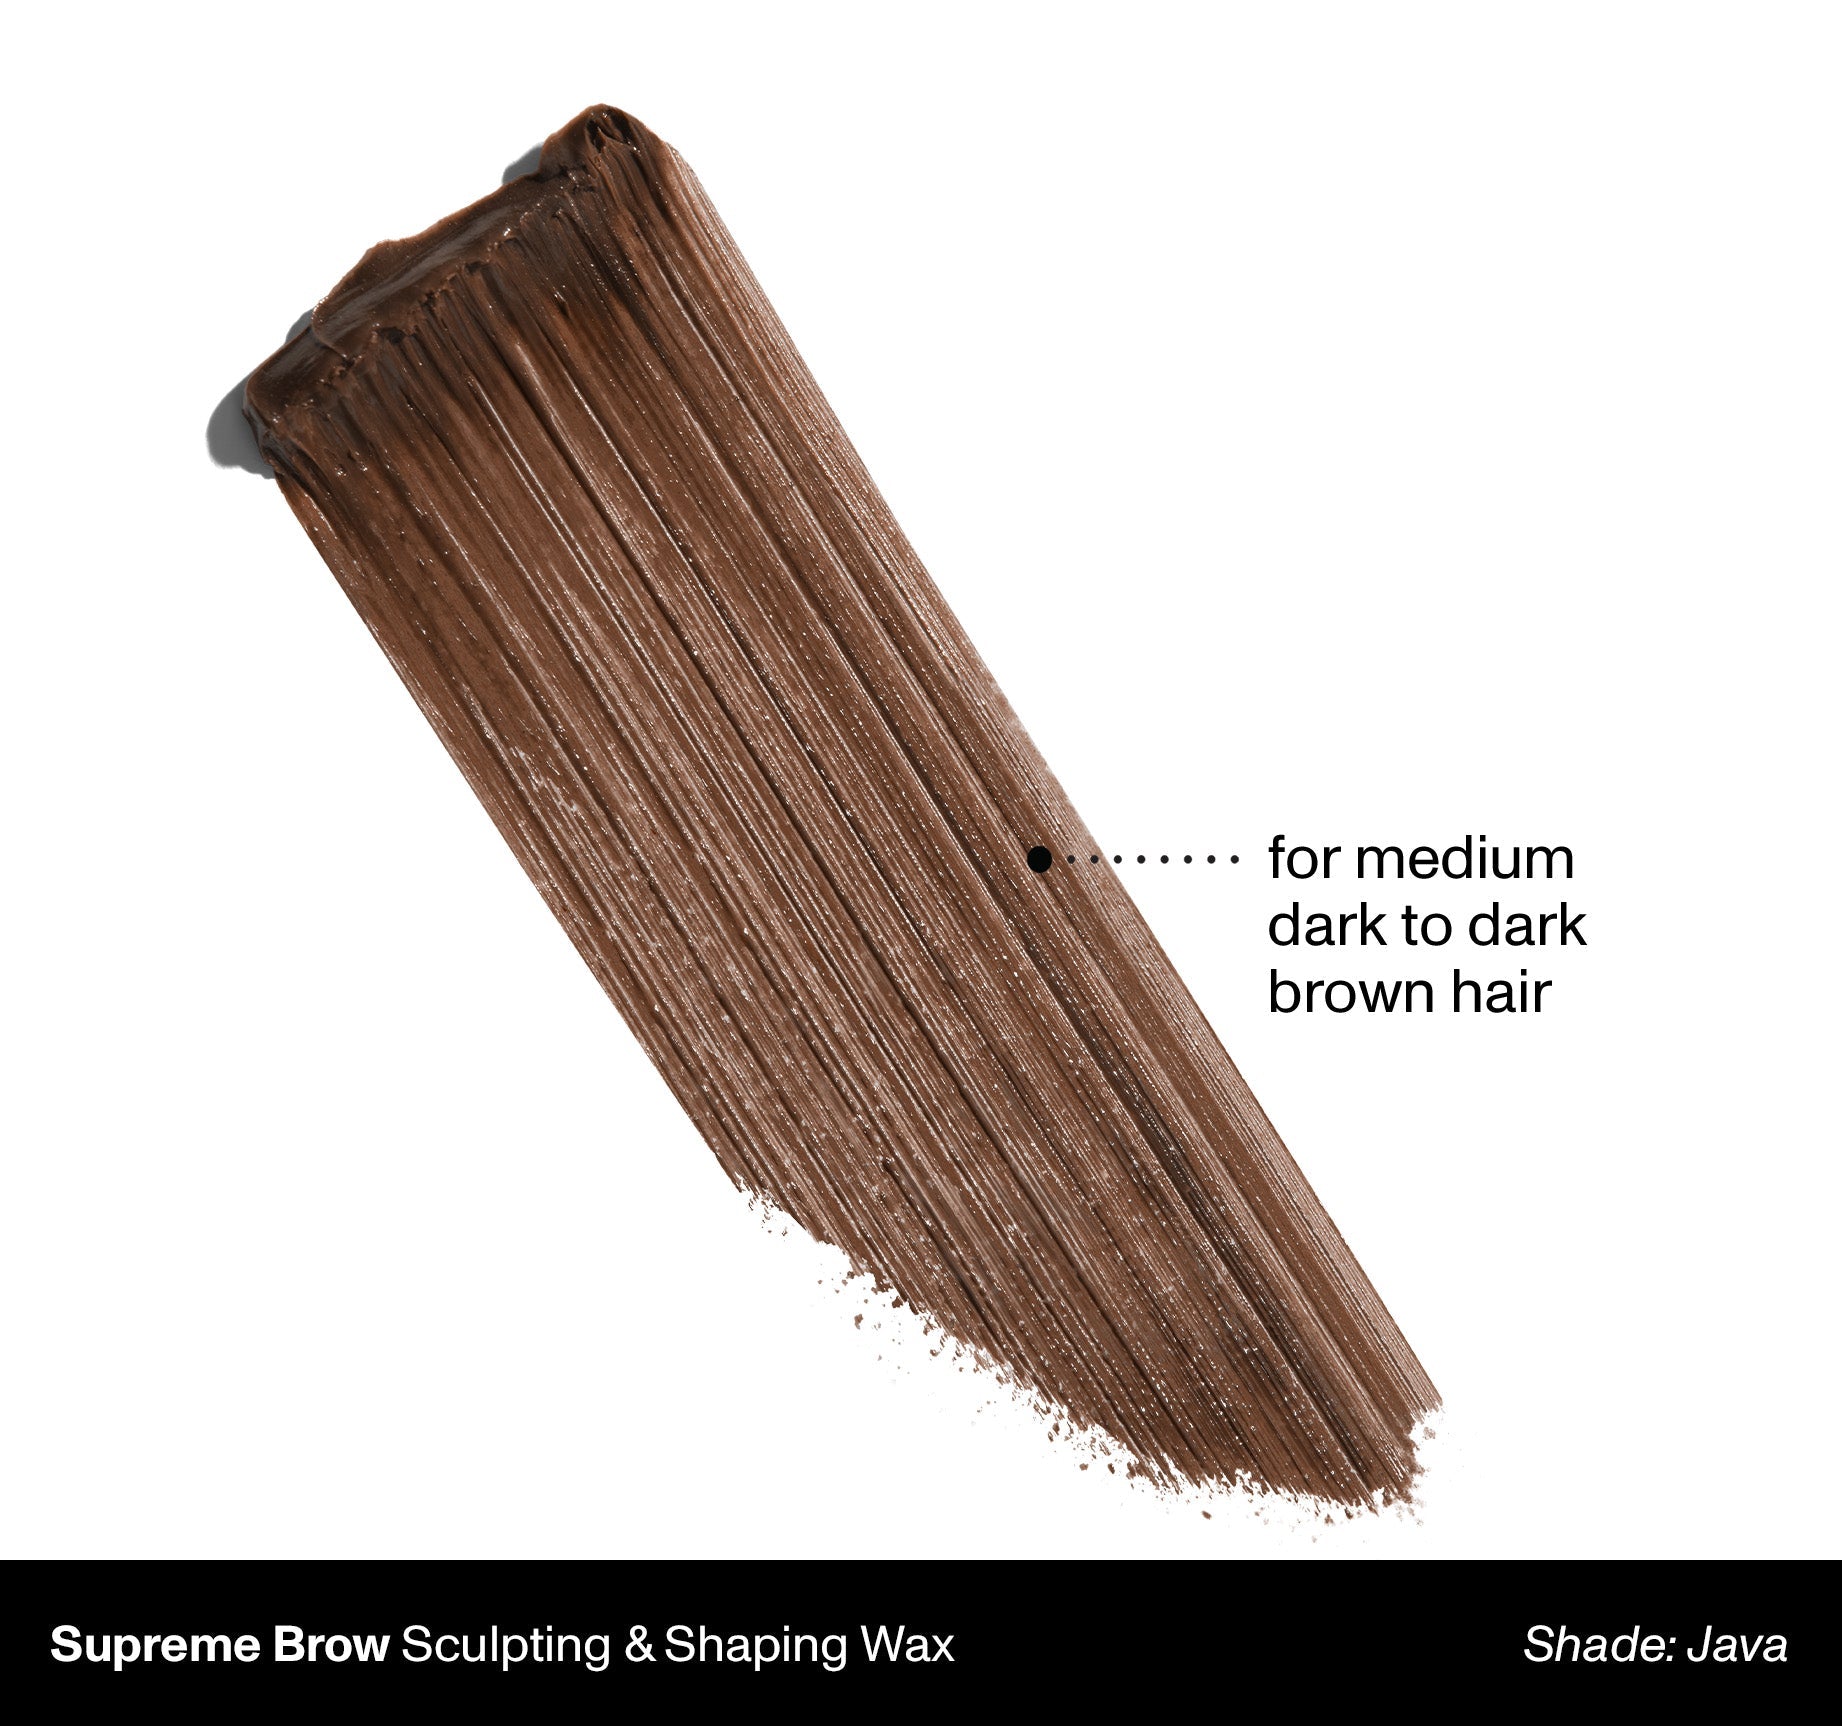 Supreme Brow Sculpting And Shaping Wax - Java - Image 2